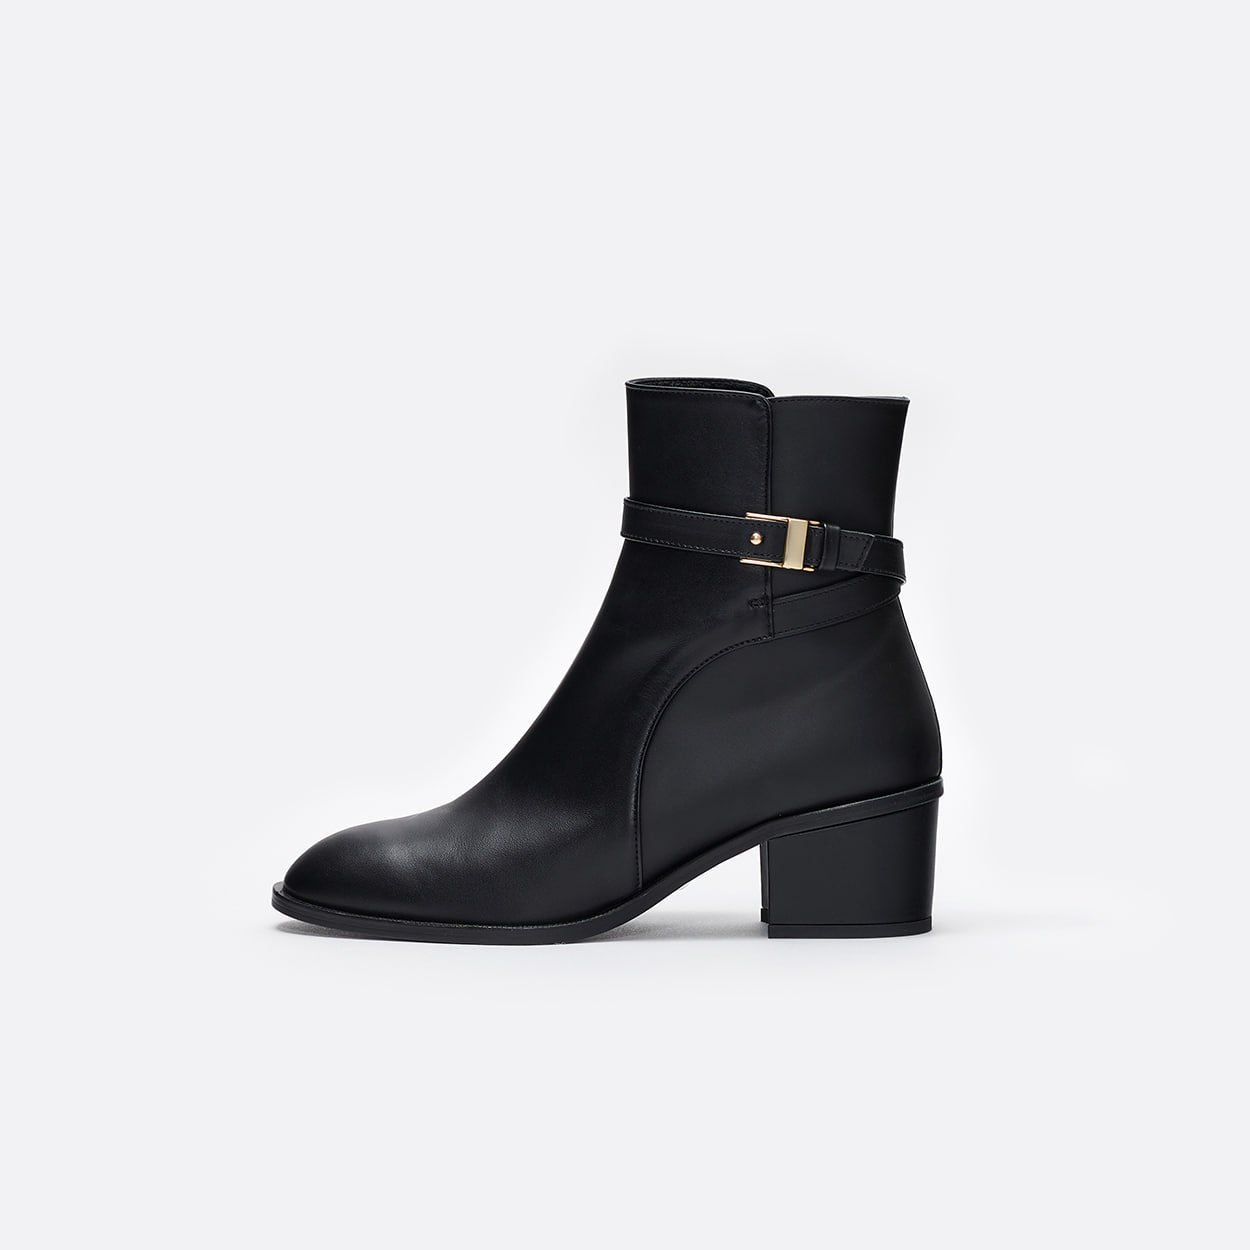 Margo ankle boots